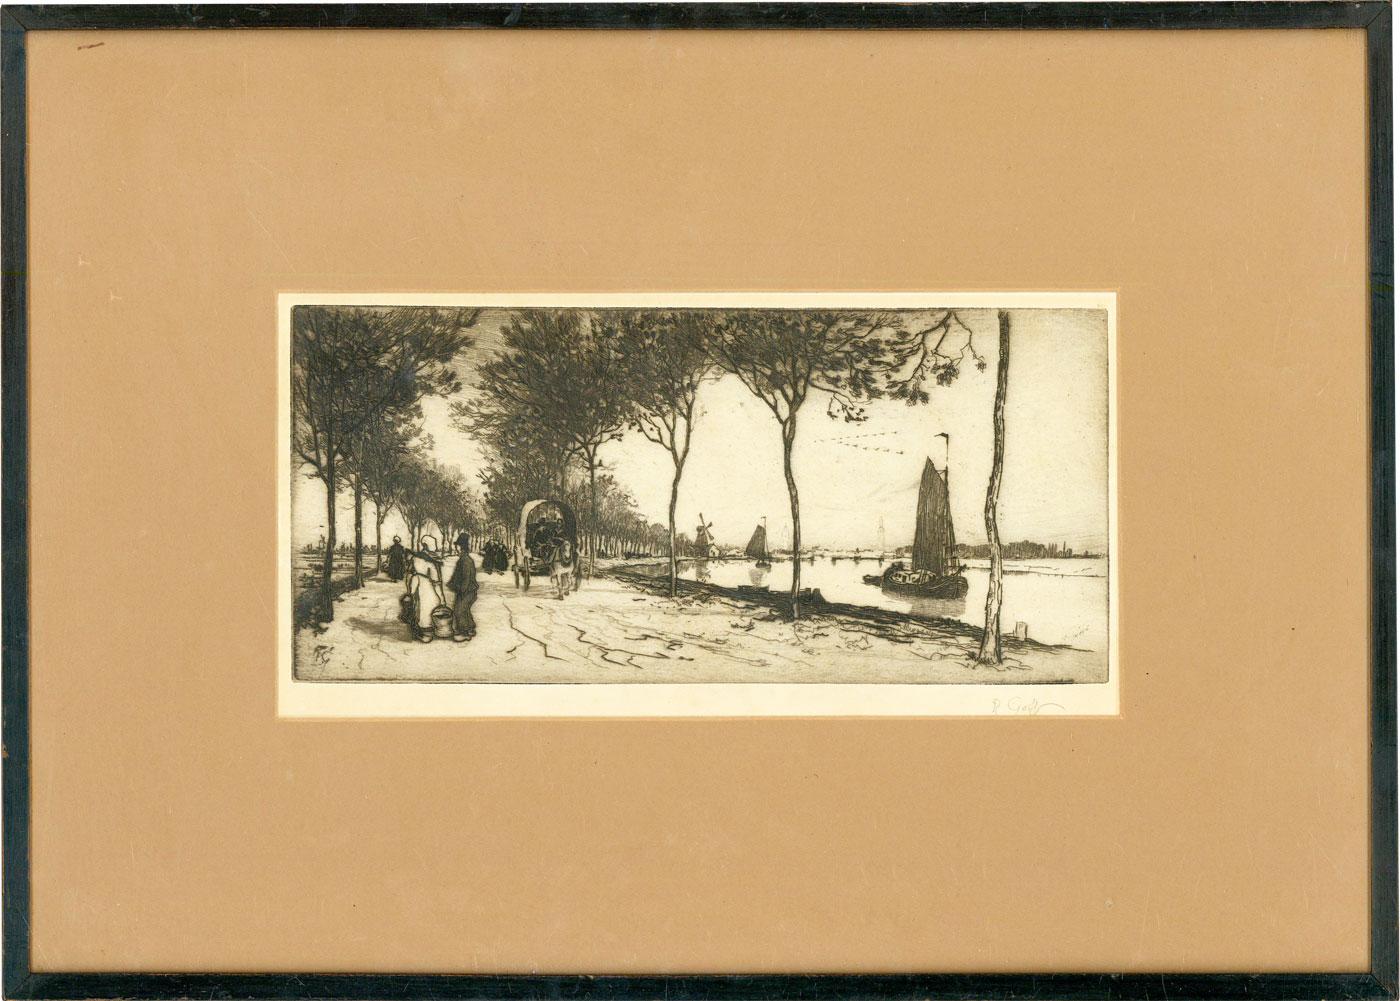 Robert Charles Goff, R.E. Landscape Print - Robert Charles Goff (1837-1922) - Framed Etching, Boats on a Dutch River